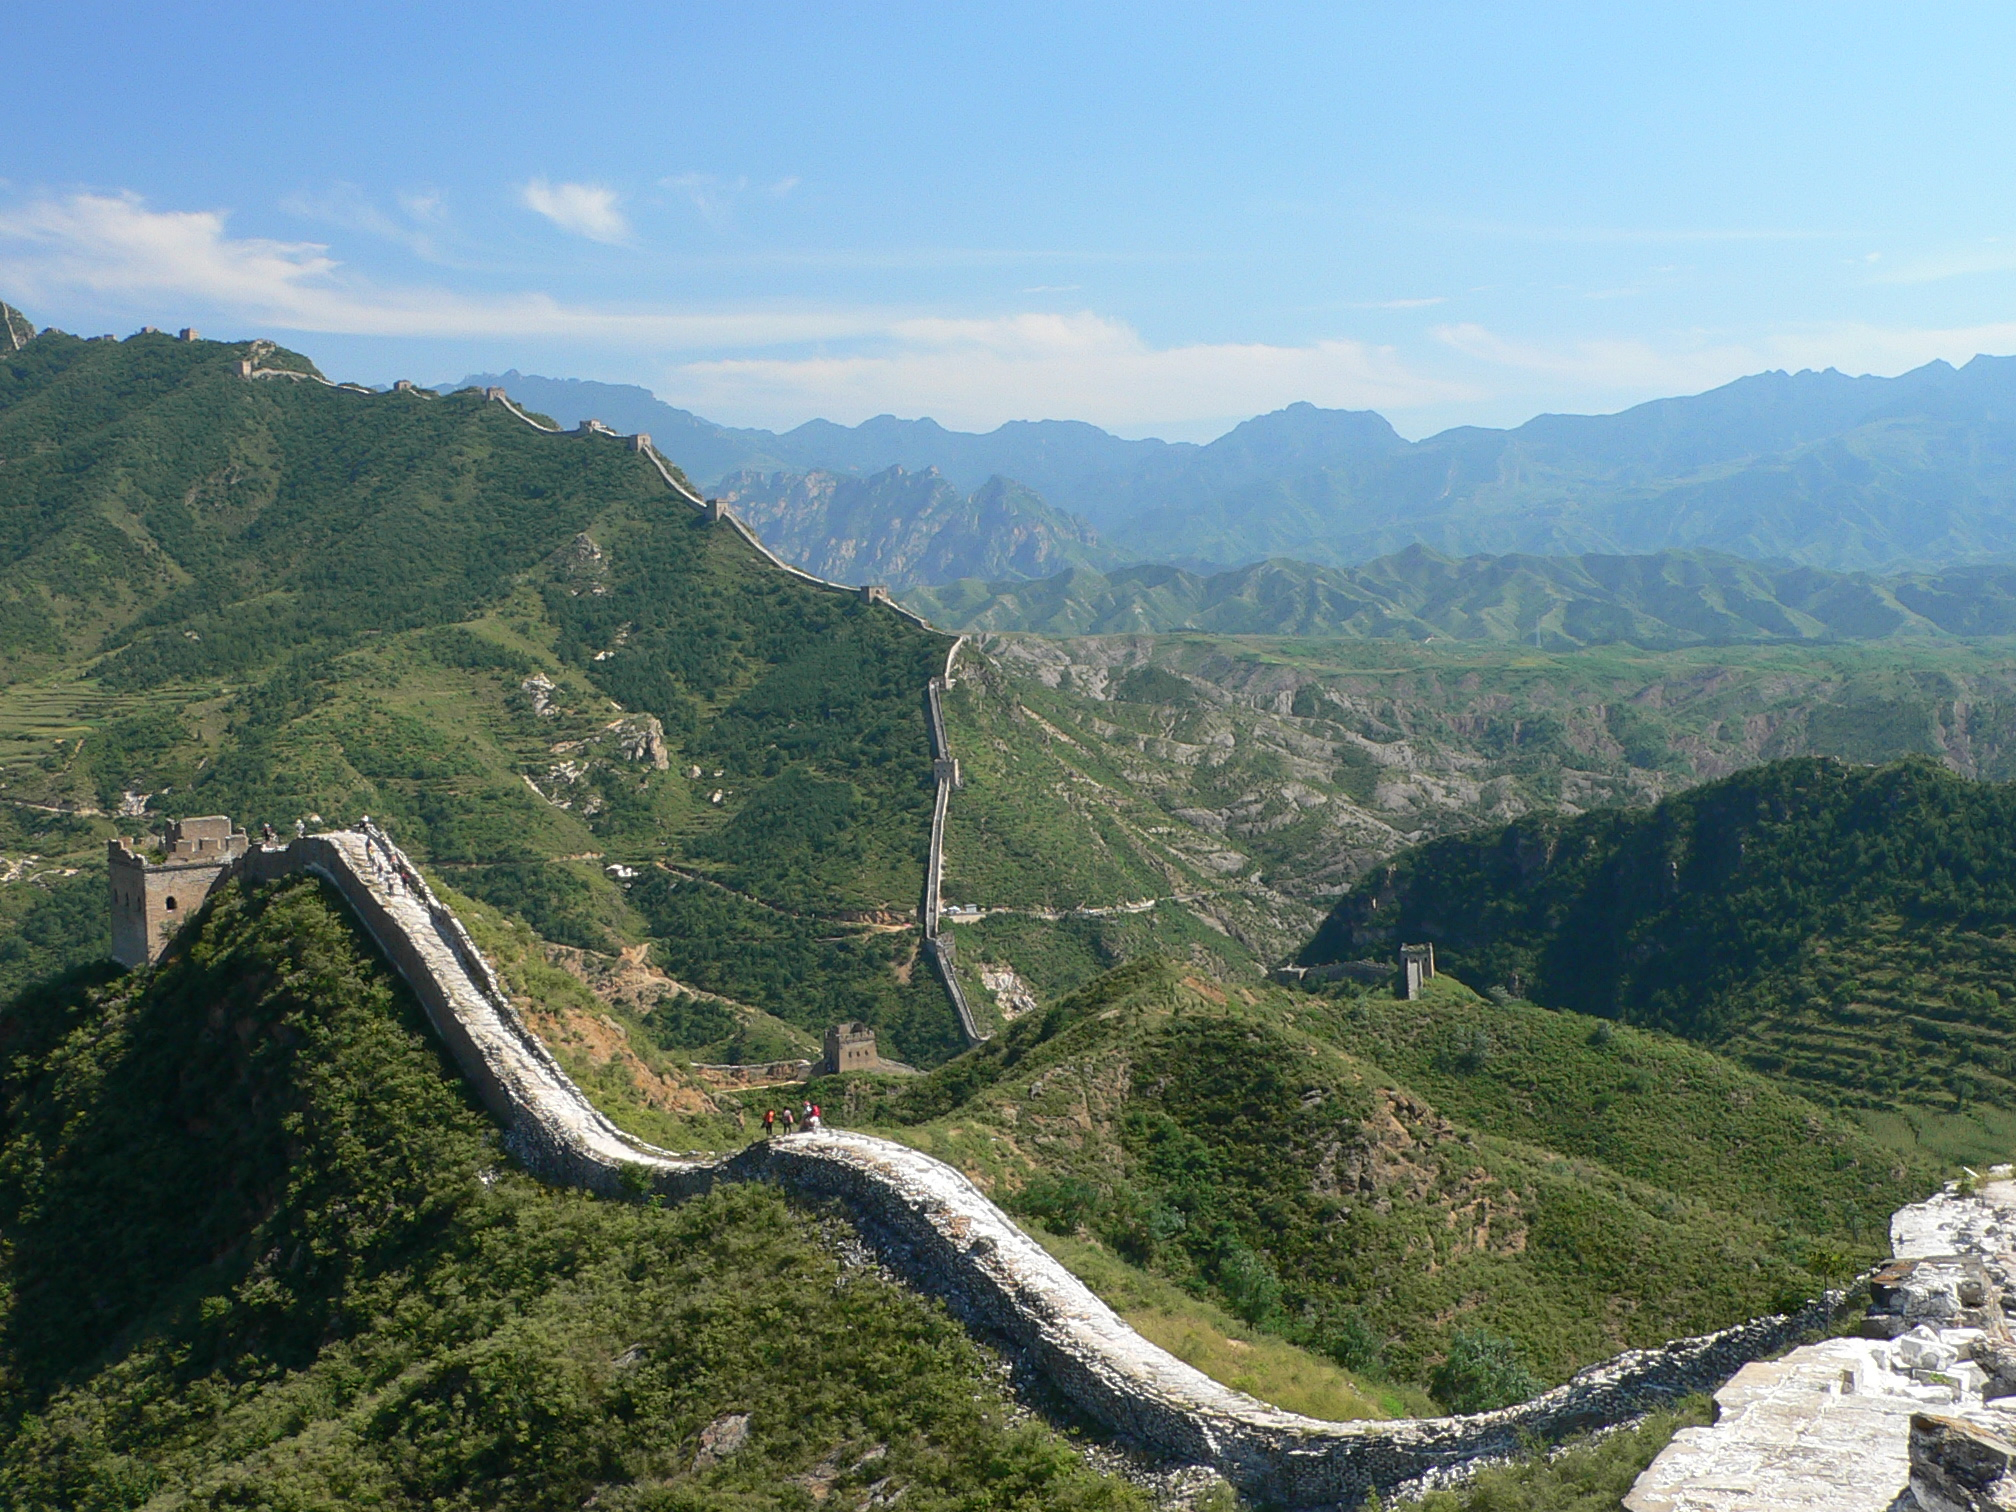 The Great-Wall of China Wallpaper